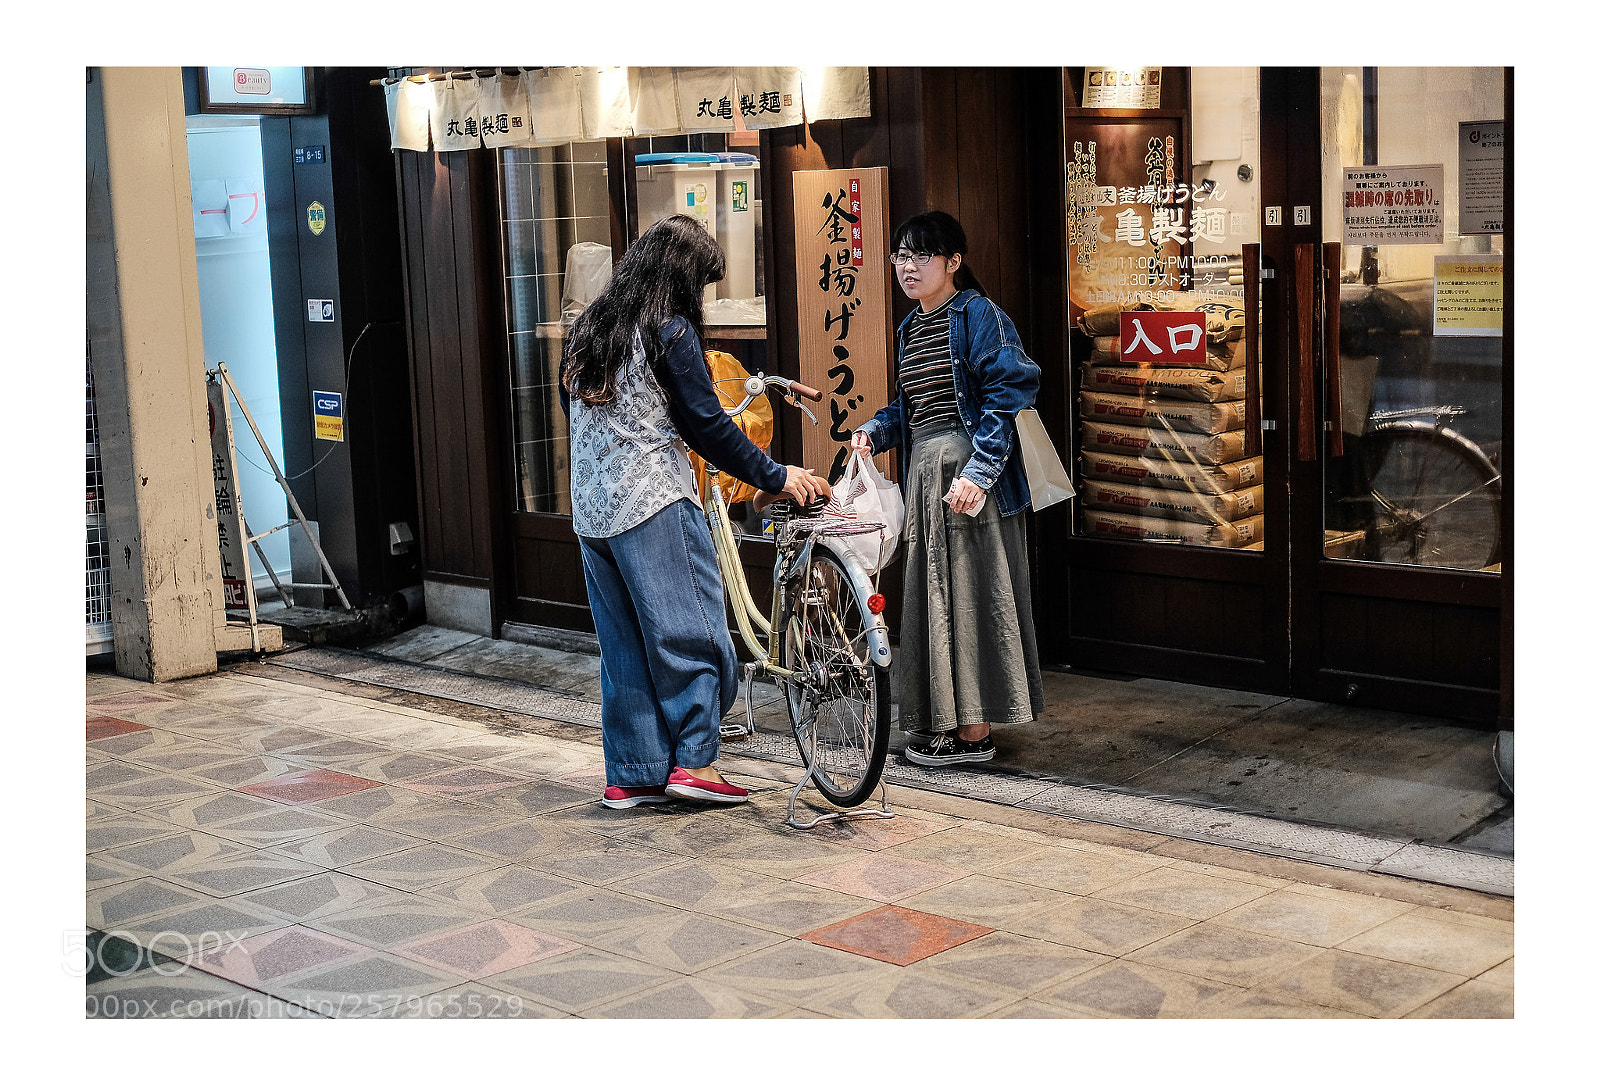 Fujifilm X-T1 sample photo. After work photography